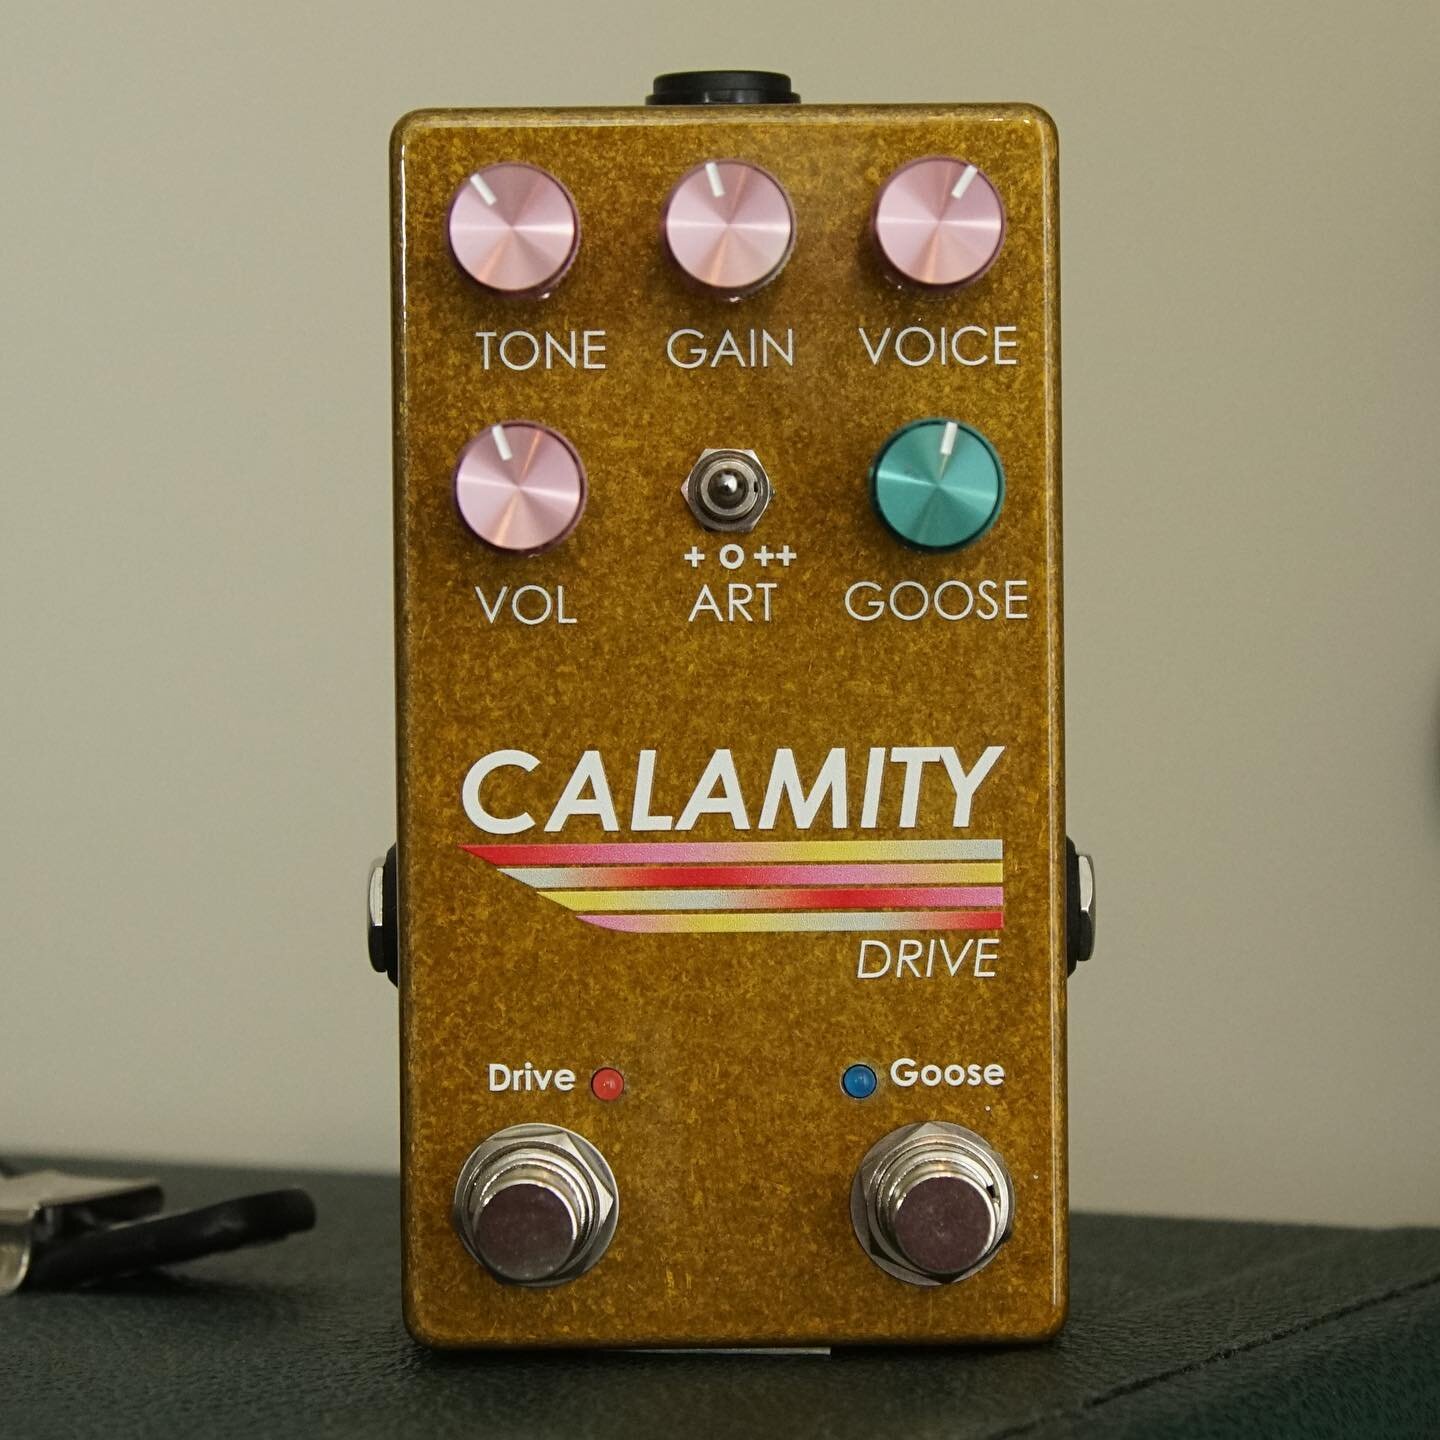 In celebration of our album being out here is a special limited color way of Calamity Drive!

We also wanted to do some good beyond improving your tone with this special release.
15% of each sale will go toward Trans Lifeline, a grassroots hotline an